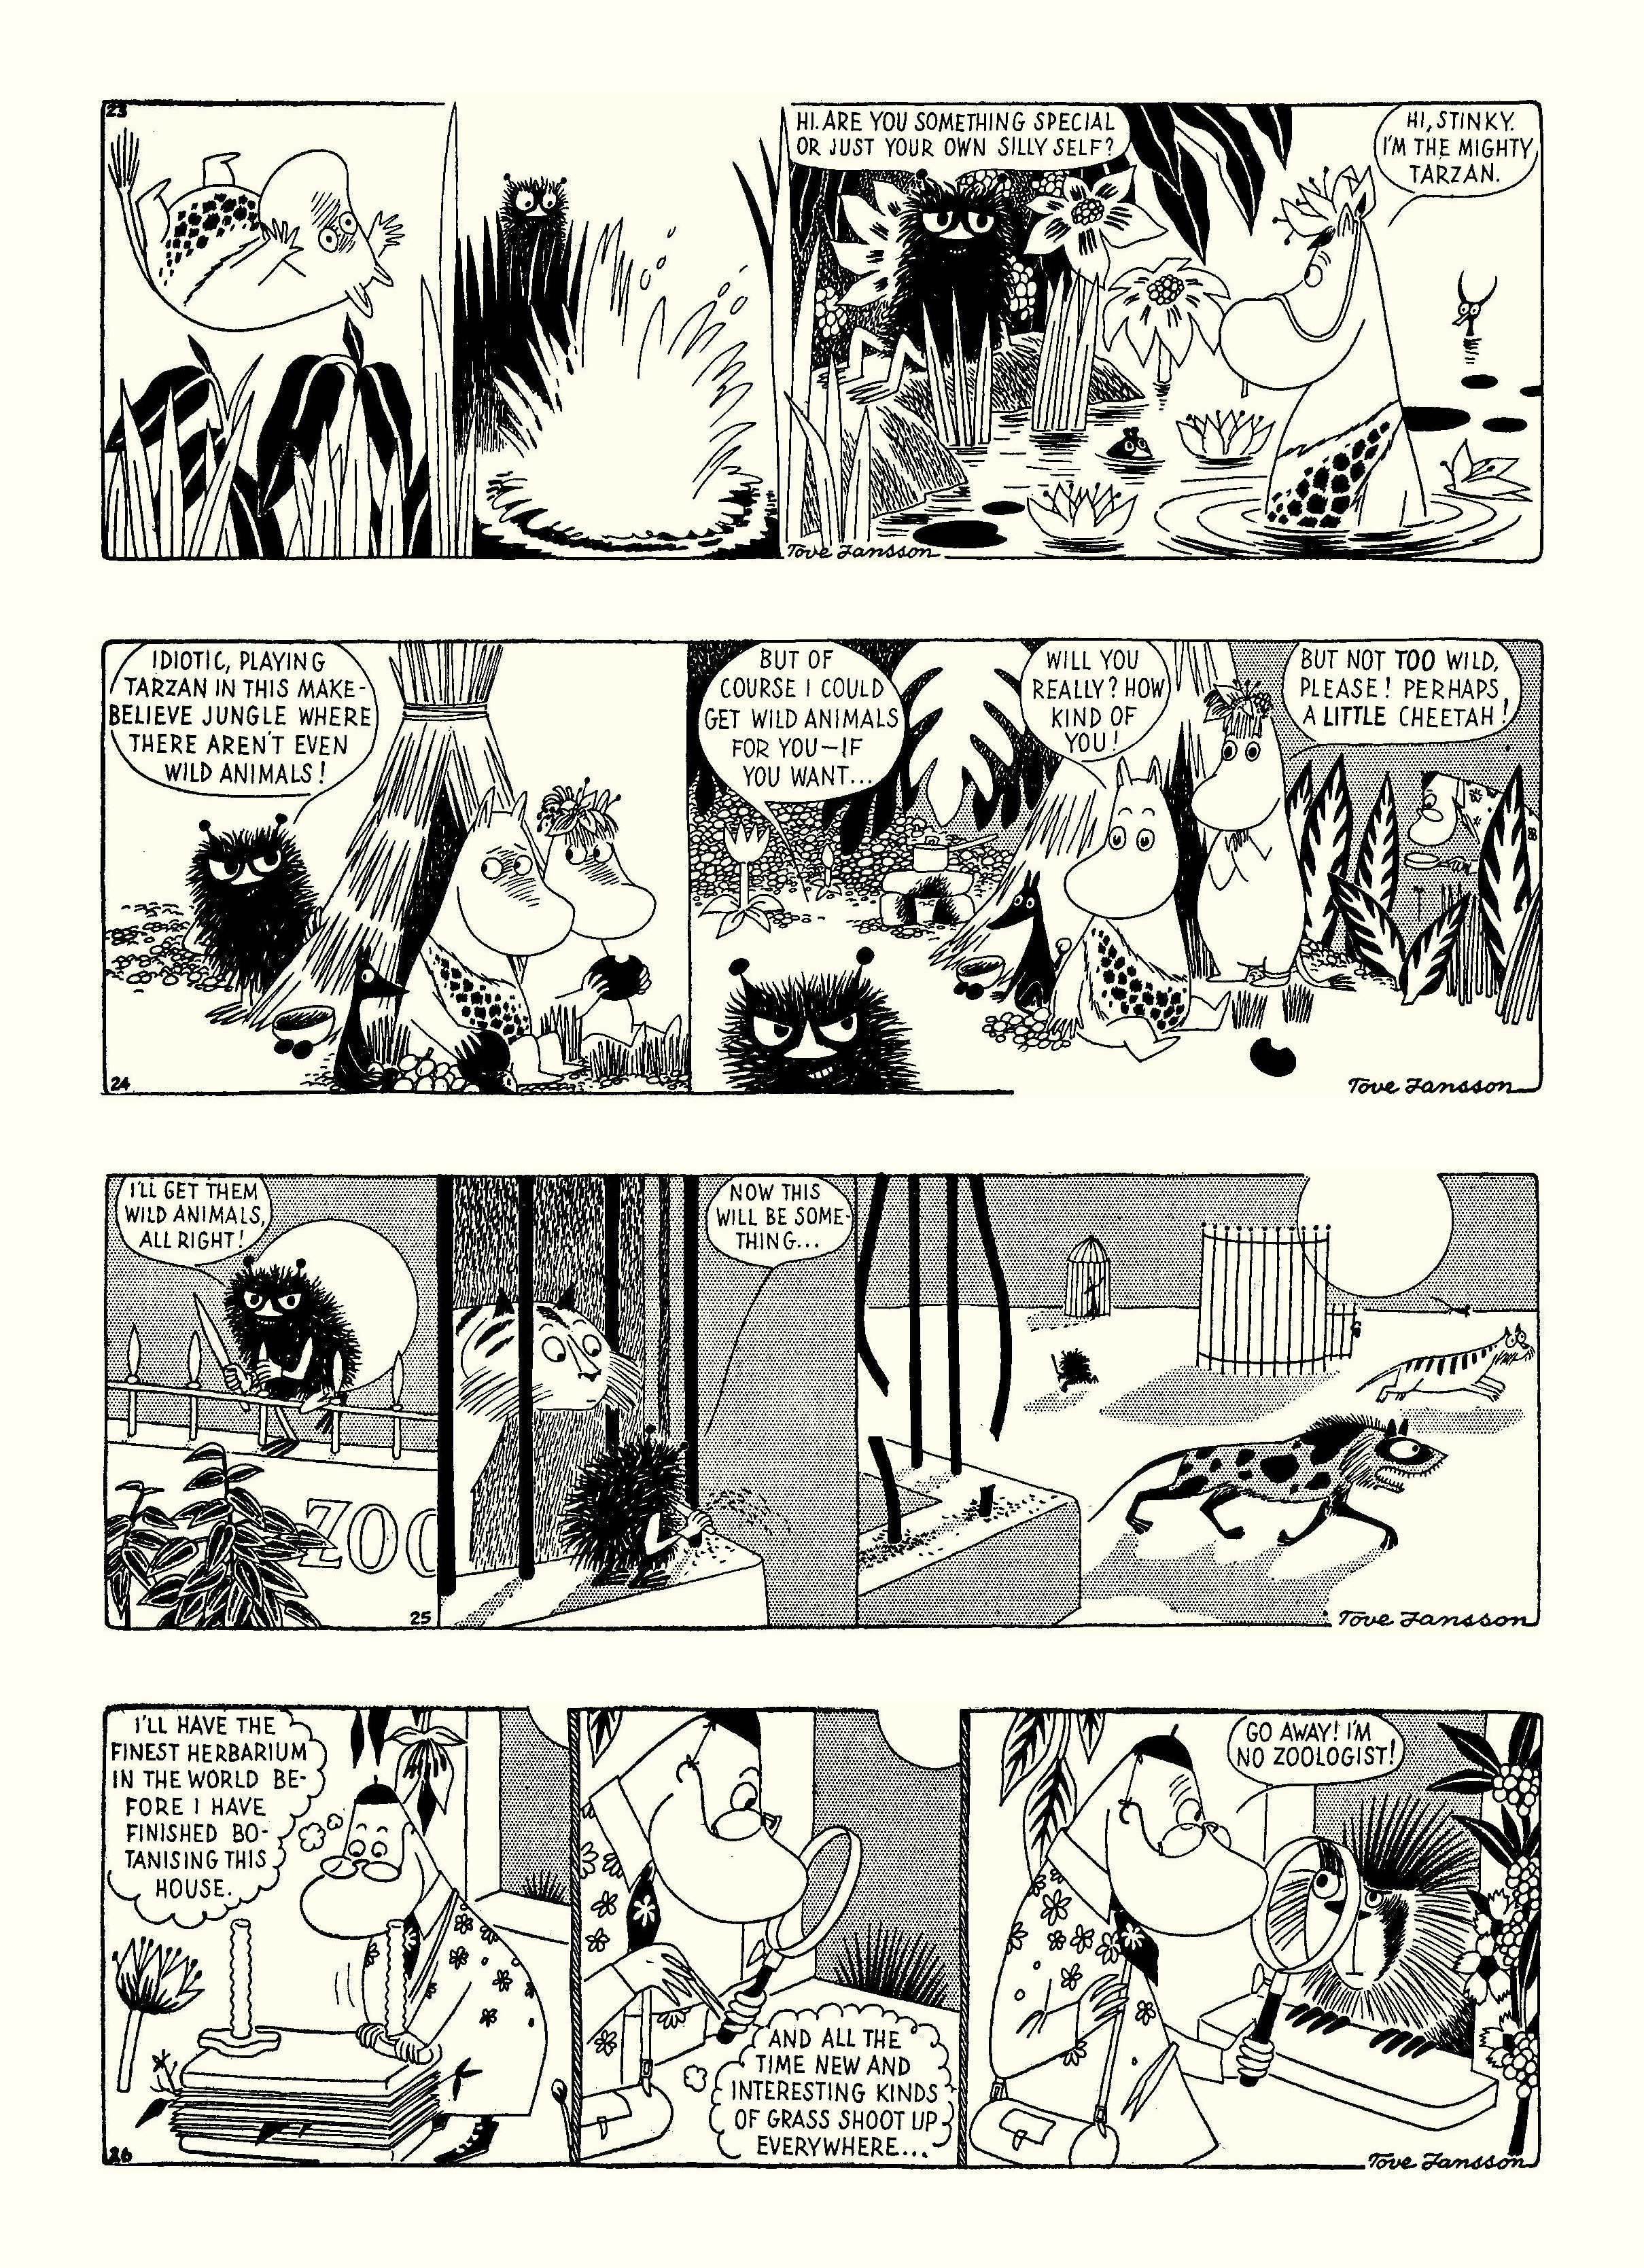 Read online Moomin: The Complete Tove Jansson Comic Strip comic -  Issue # TPB 3 - 26